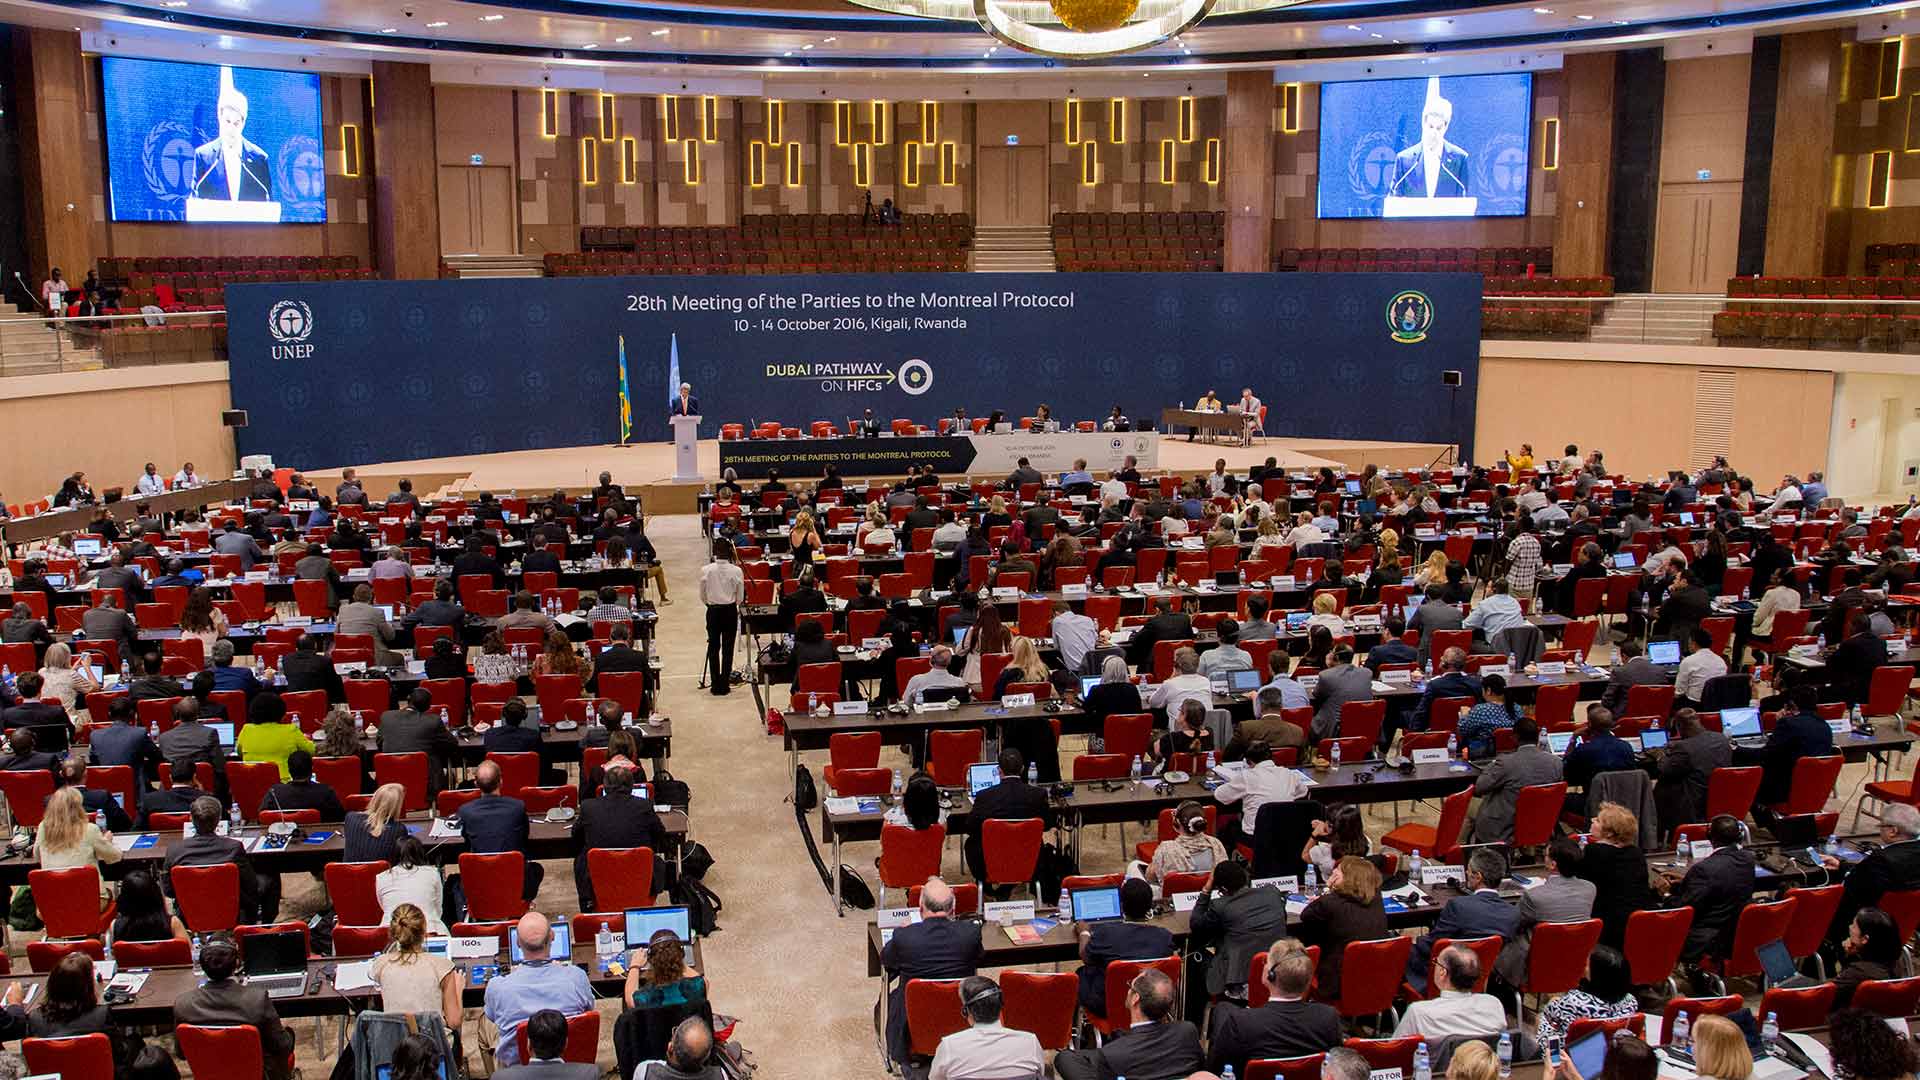 Secretary of State John Kerry,delivers a speech to the 28th Meeting of the Parties to the Montreal Protocol on Substances that Deplete the Ozone Layer, in Kigali, Rwanda Friday, Oct. 14, 2016. Nations strove Friday for a deal to phase out hydrofluorocarbons from air conditioners and refrigerators as part of efforts to fight climate change. (AP Photo)